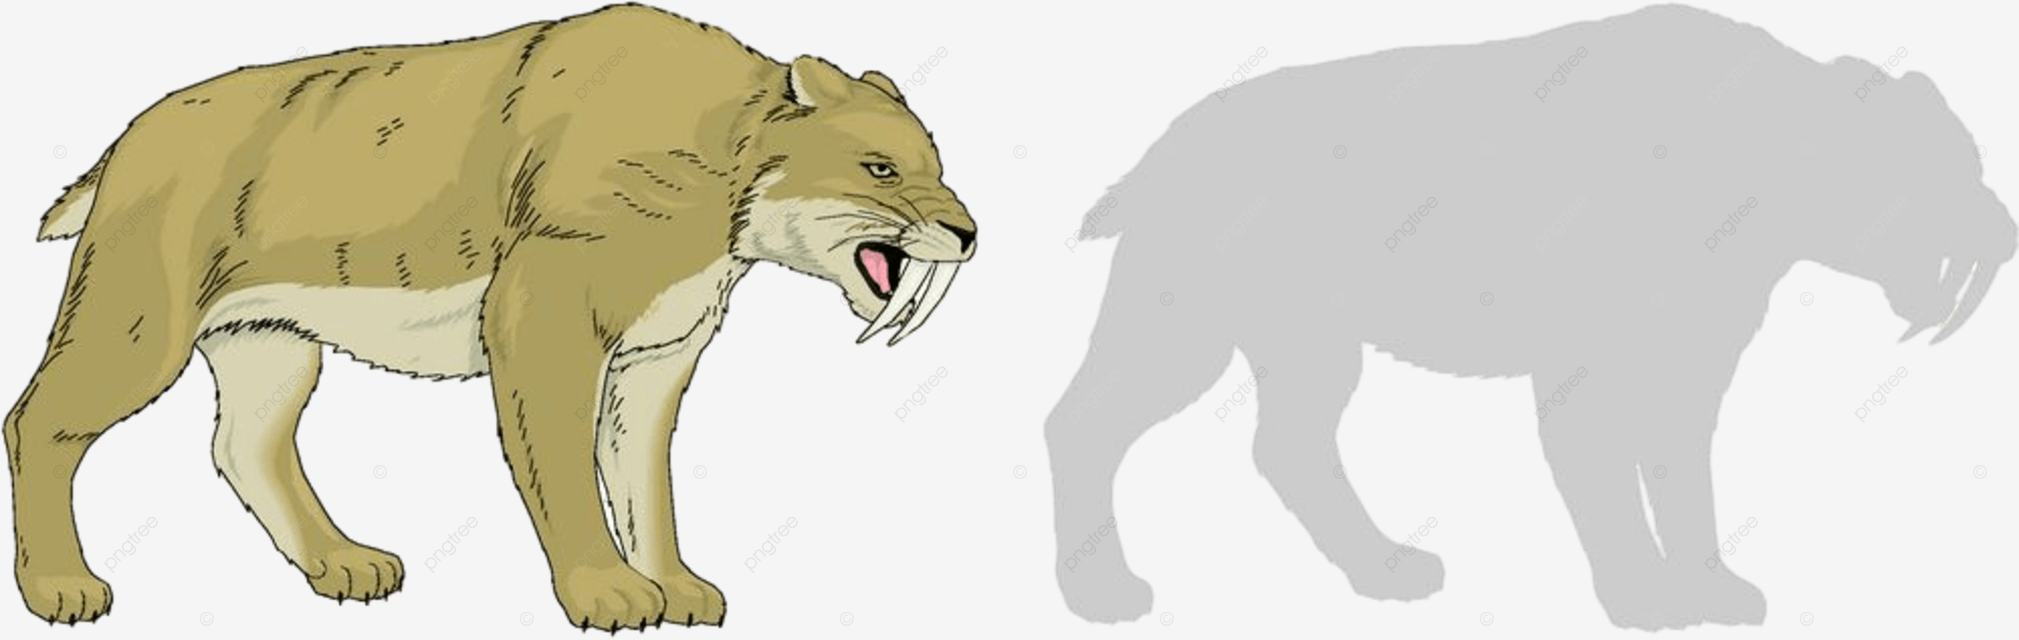 Saber tooth vector hd png images saber tooth tiger print and vectors allpu mammals png image for free download